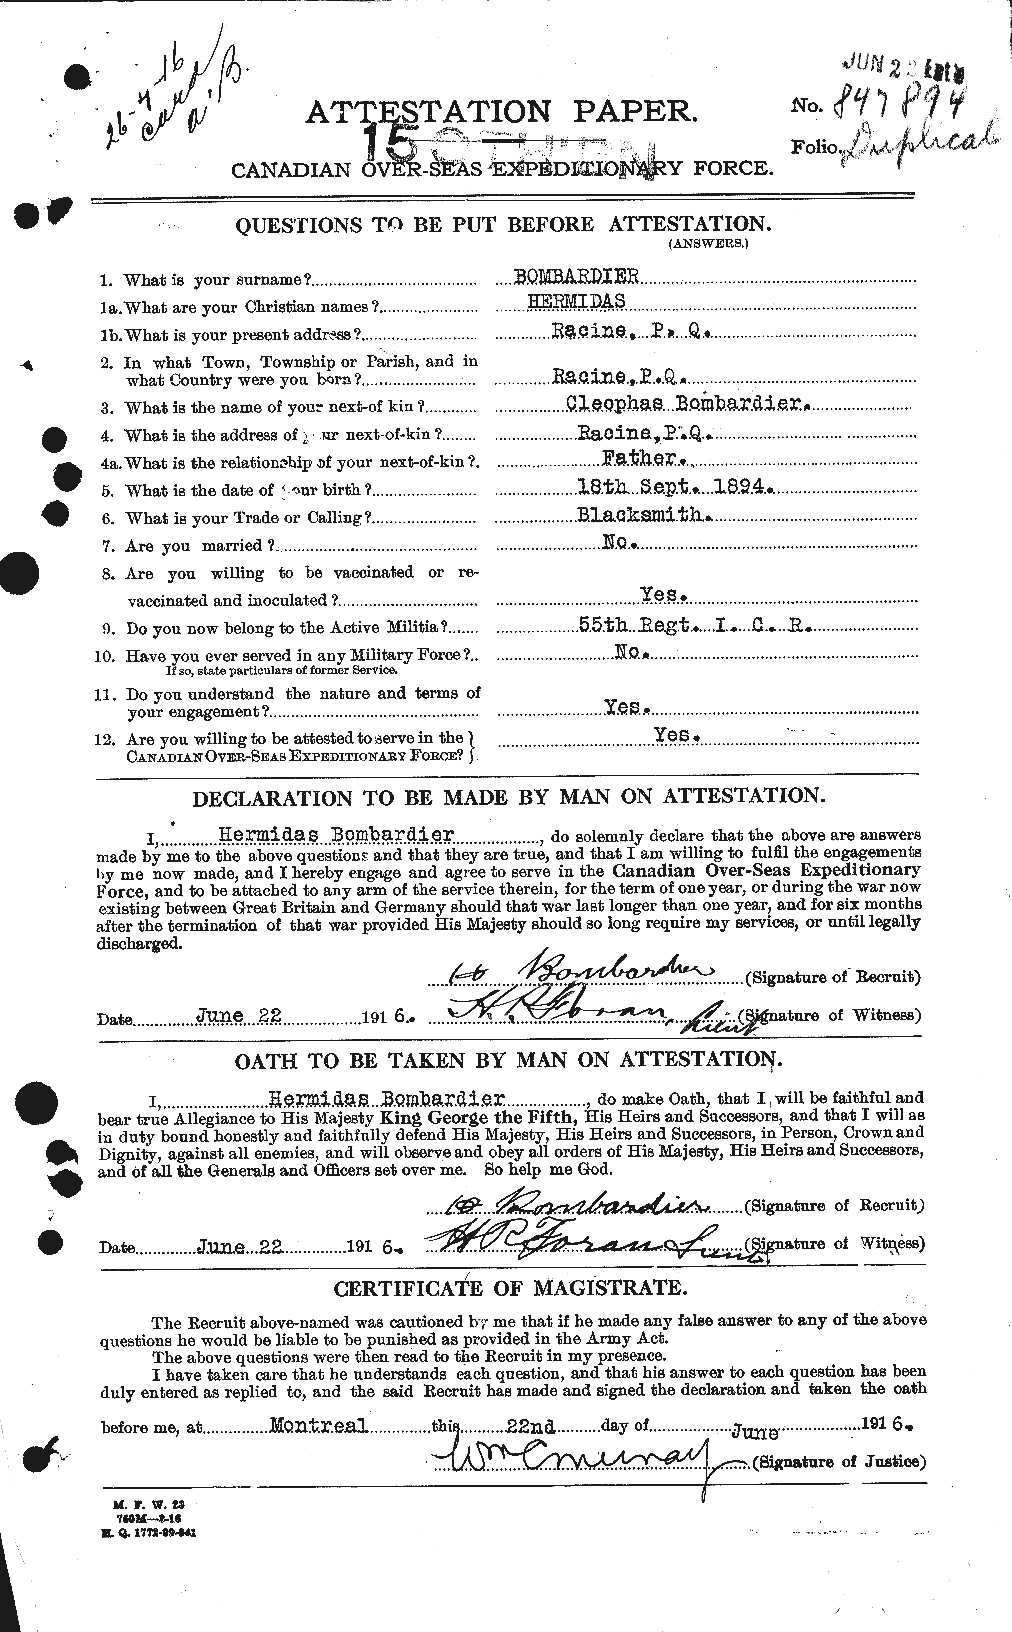 Personnel Records of the First World War - CEF 250180a